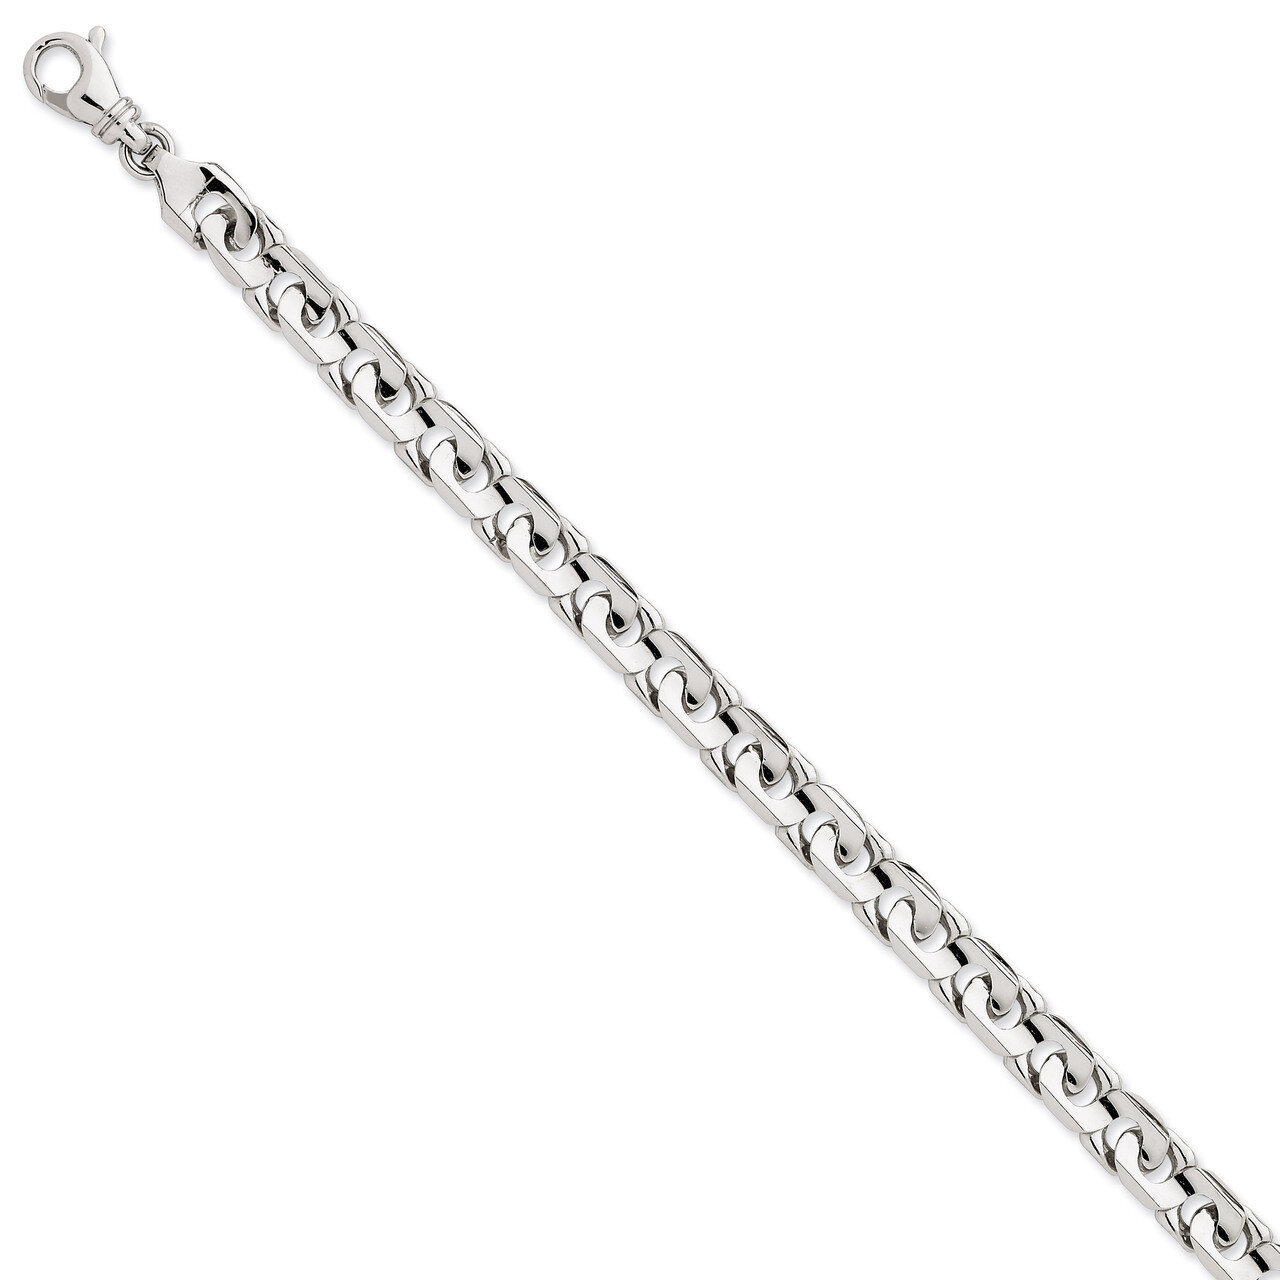 8mm Hand-Polished Fancy Link Chain 22 Inch 14k White Gold WLK178-22